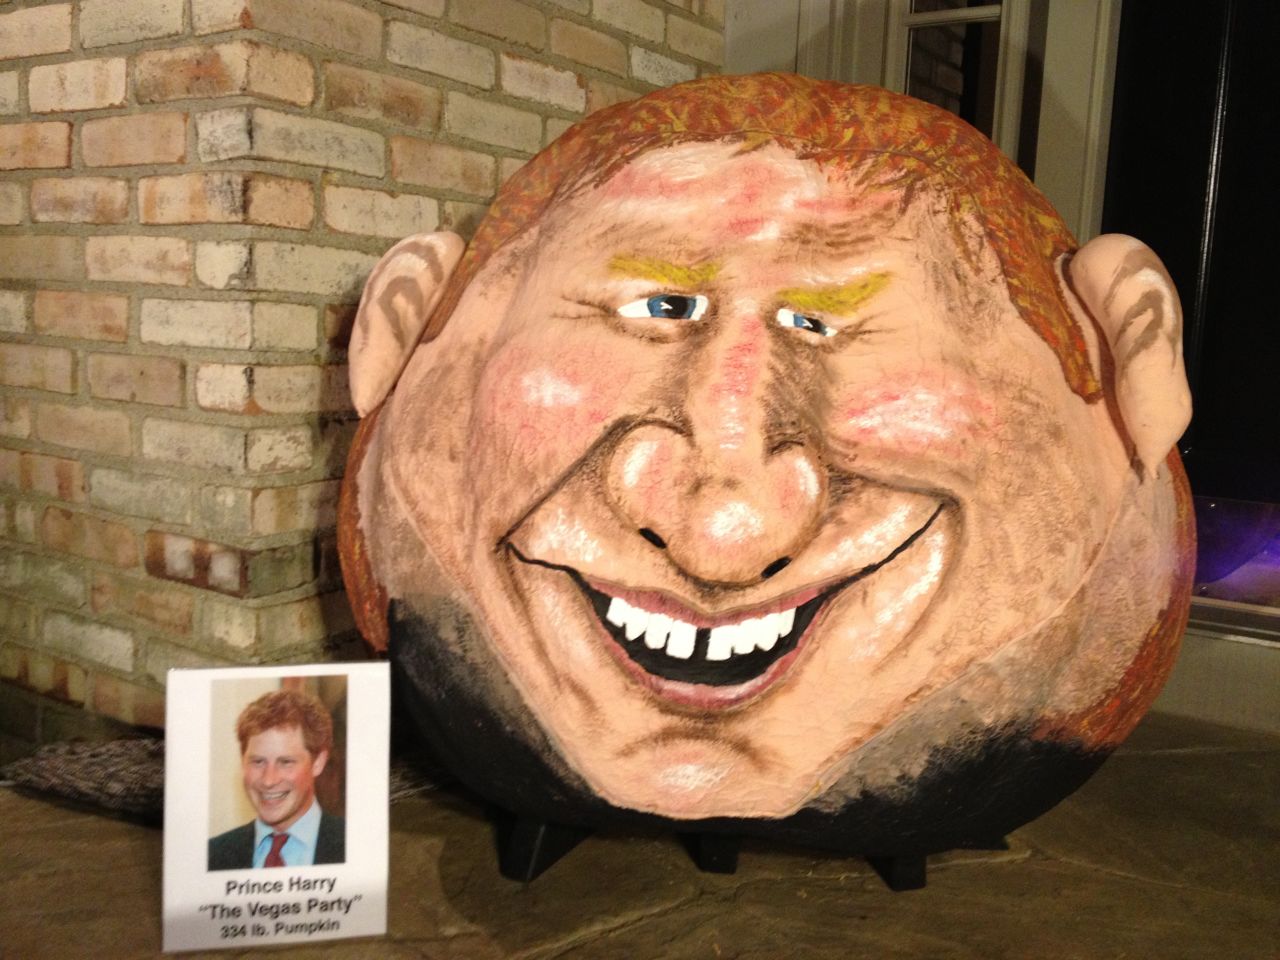 Prince Harry <a href="http://www.cnn.com/2012/08/22/showbiz/prince-harry-photos/">made headlines</a> after naked photos of his highness surfaced from his August 2012 trip to Las Vegas. Naughty Prince Harry turned into a pumpkin that year.